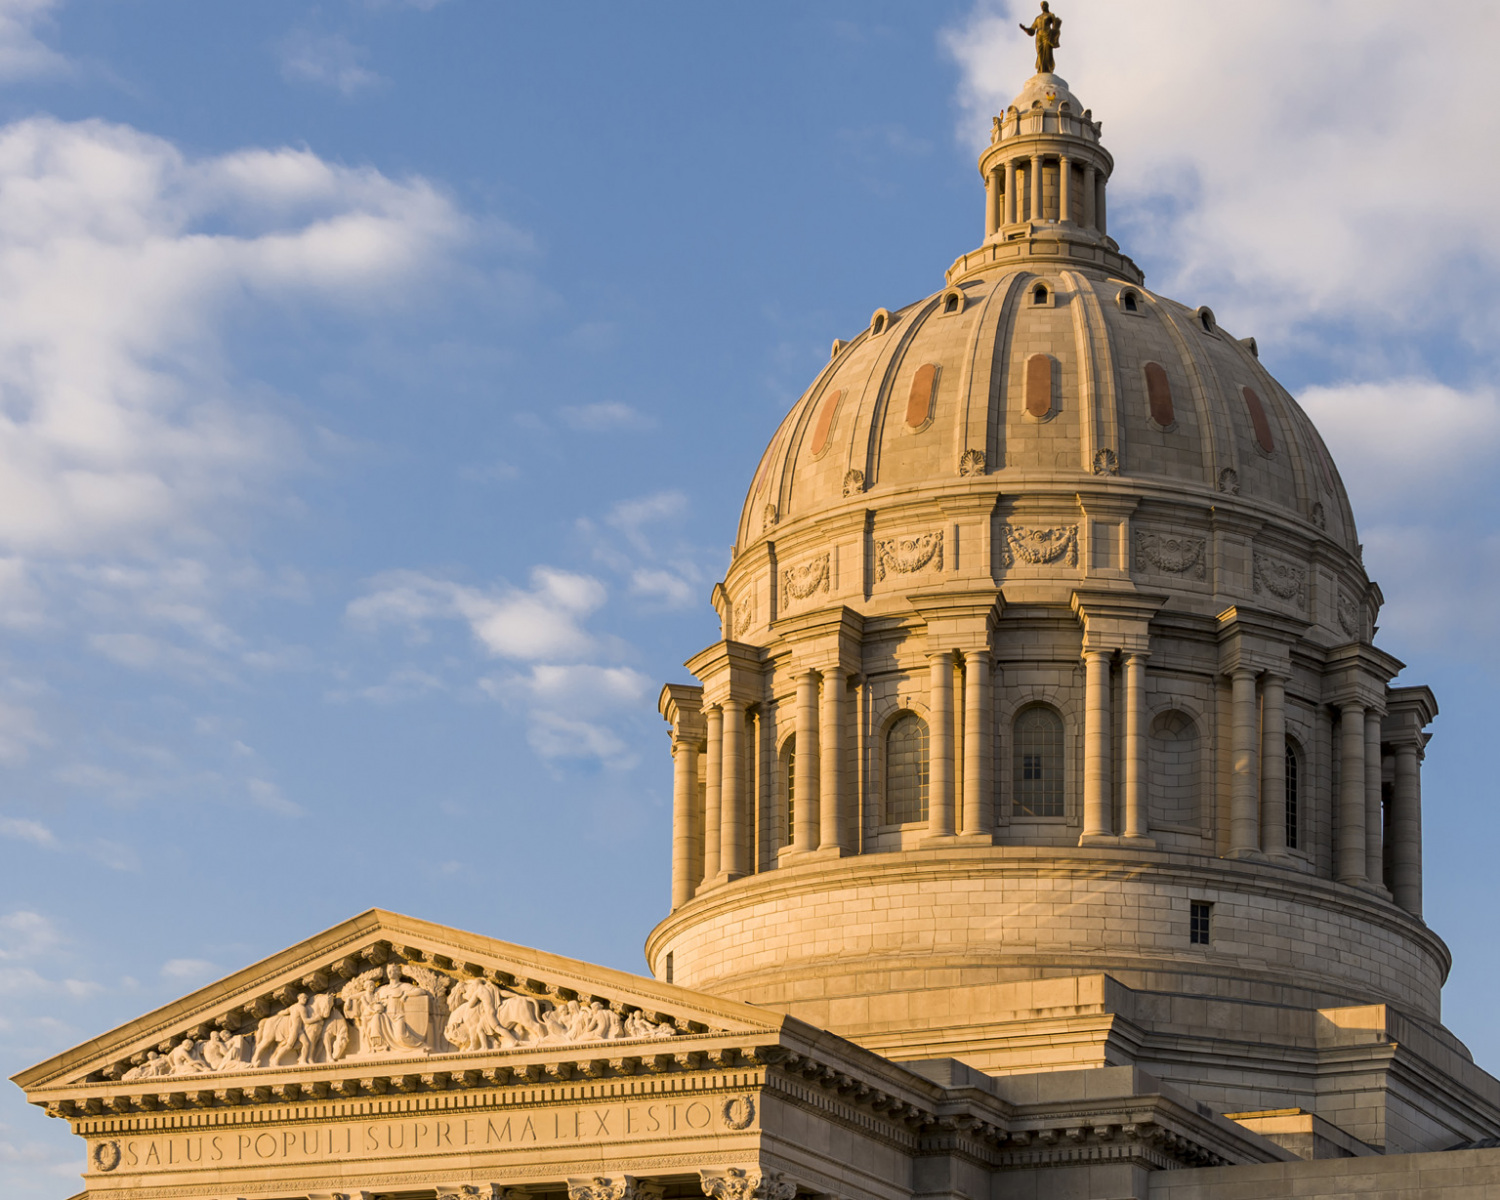 An image of the Missouri State Capitol dome.  Atop the dome is a statue of Ceres, the Roman goddess of grain and agriculture, designed by Sherry Fry.  Designed by the architectural firm of Tracy And Swartwout, the American Renaissance structure was constructed between 1913 and 1917.  The Missouri State Capitol, located in Jefferson City, is listed on the National Register of Historic Places.  This image © Capitolshots Photography/TwoFiftyFour Photos, LLC, ALL RIGHTS RESERVED.